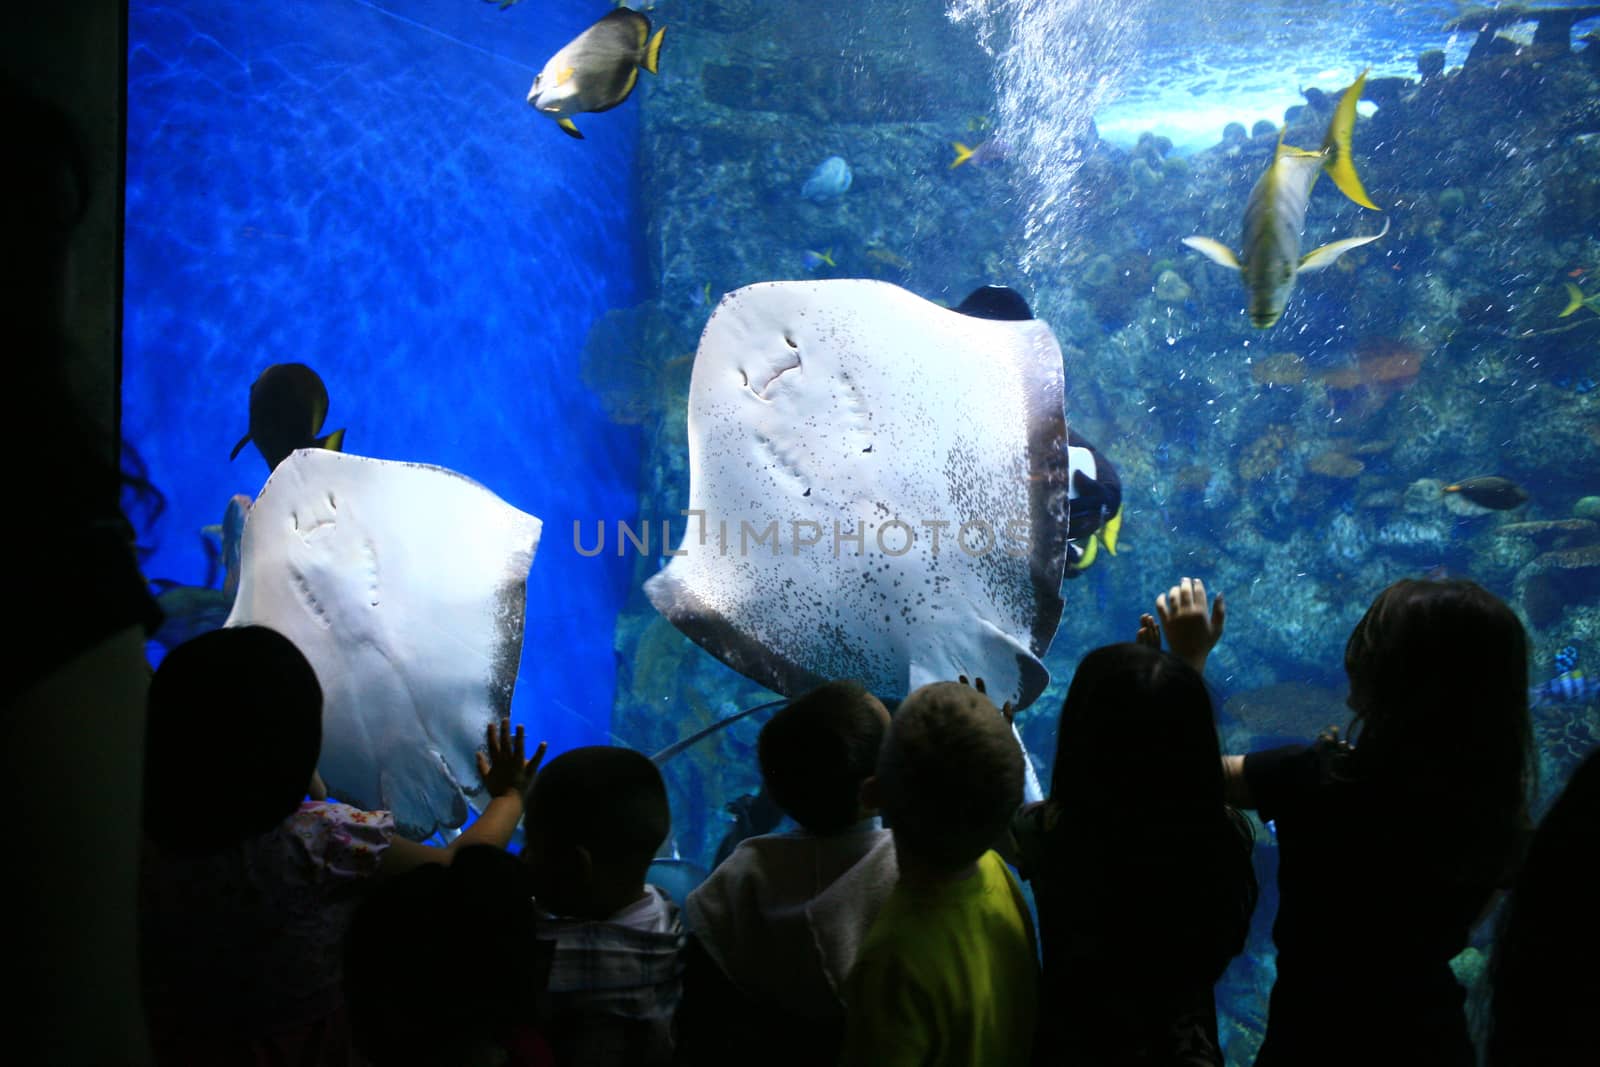 Sting Rays in a Giant Aquarium With Children Watching by tobkatrina